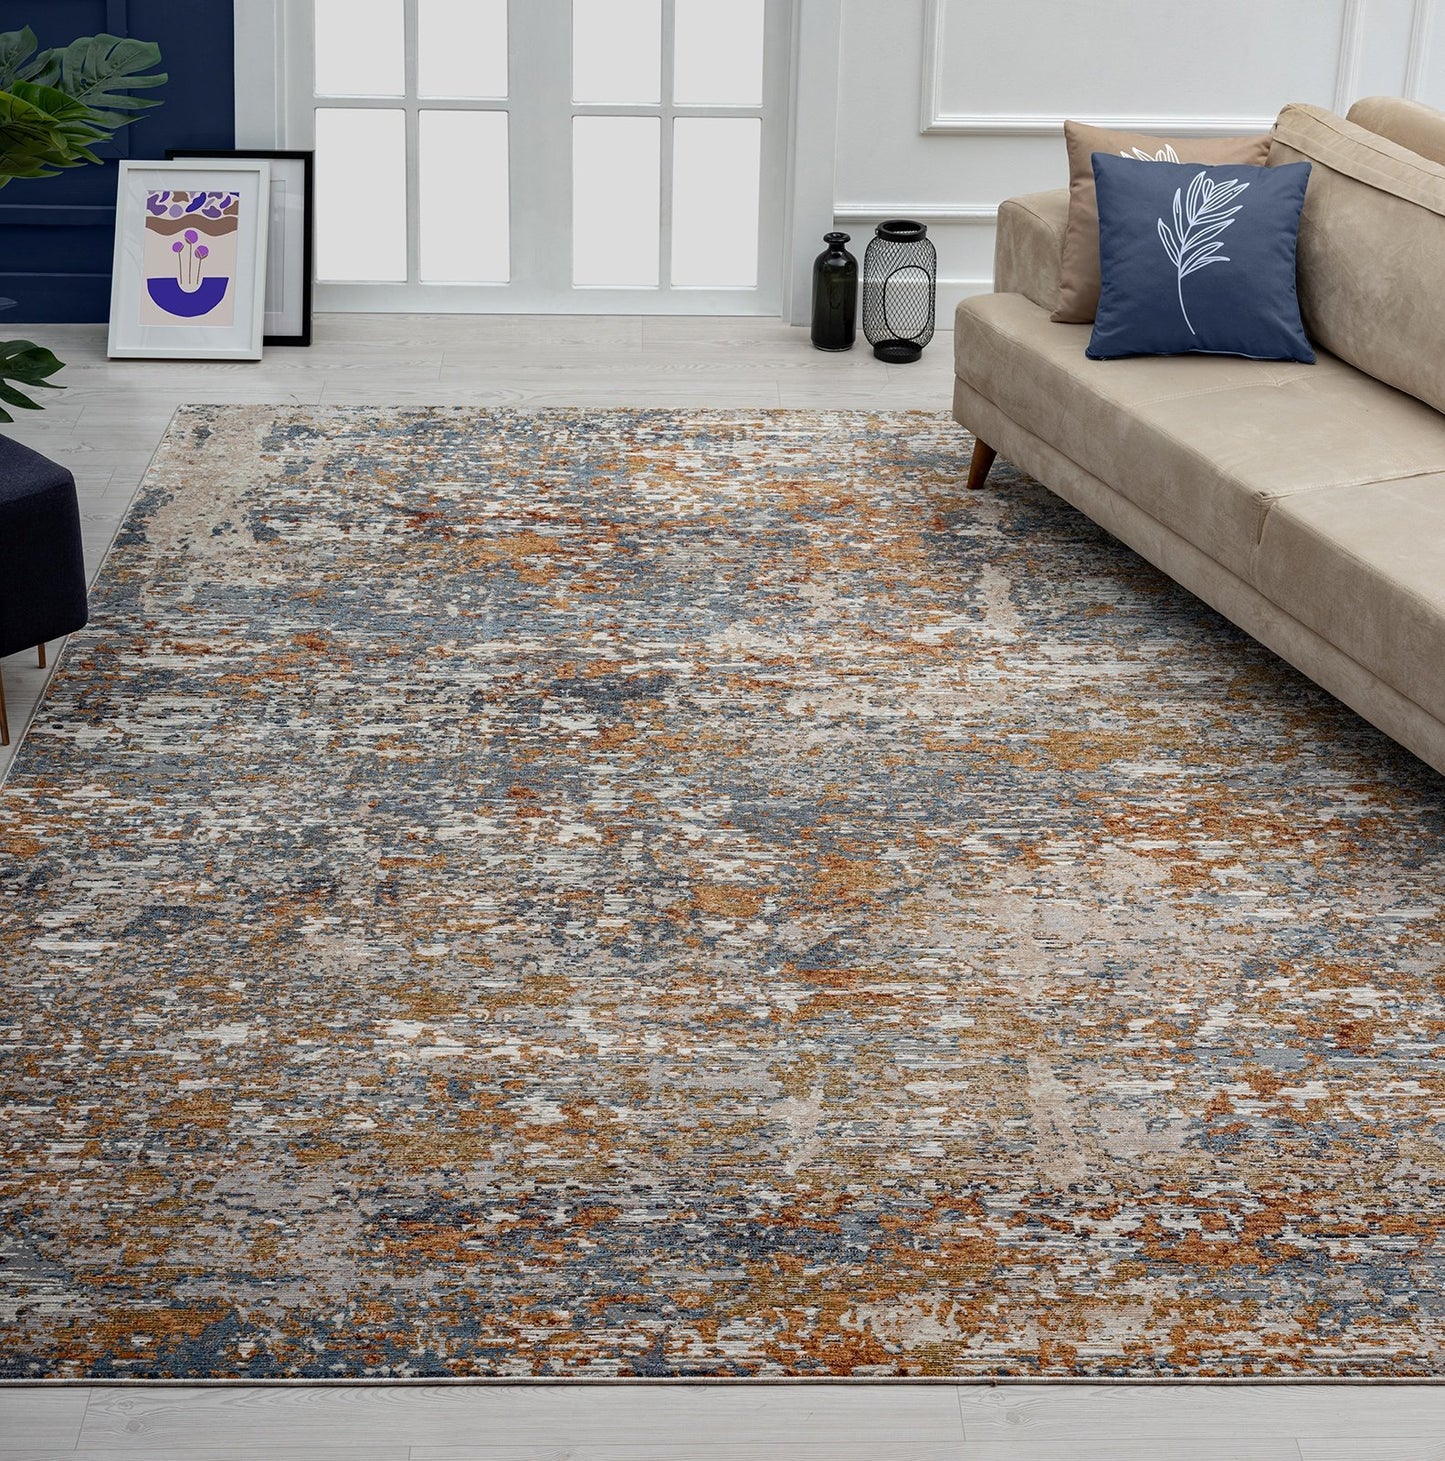 Camilla Blue and Rust Tones Abstract Area Rug